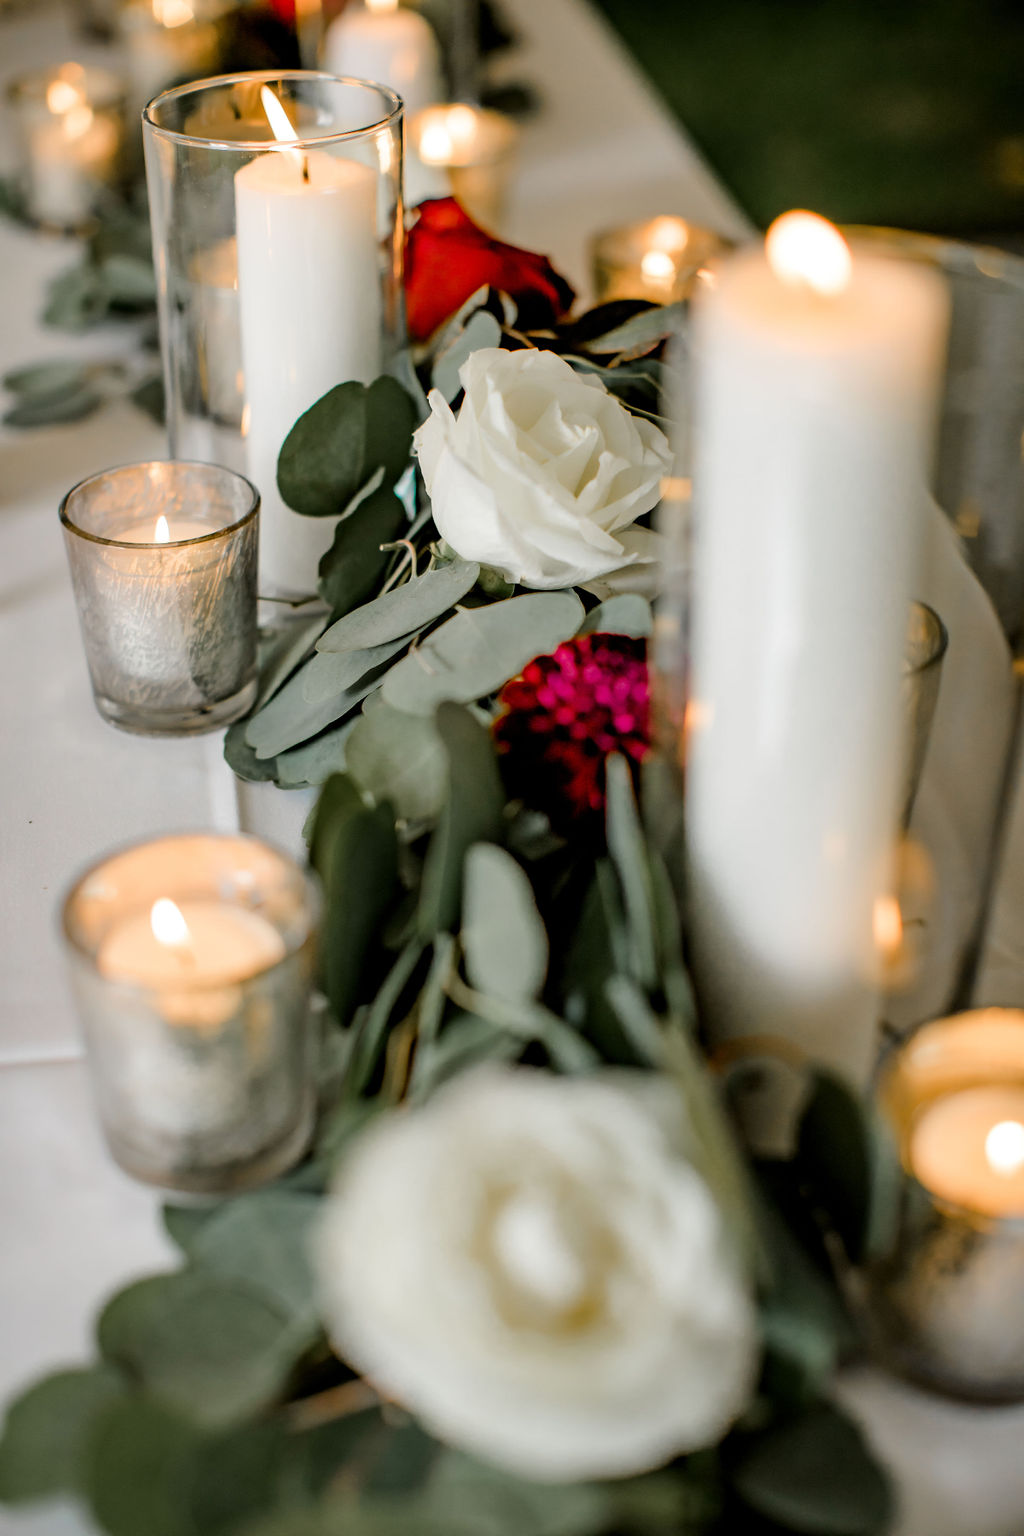 Candles and floral design on tables at Jackson, MI wedding